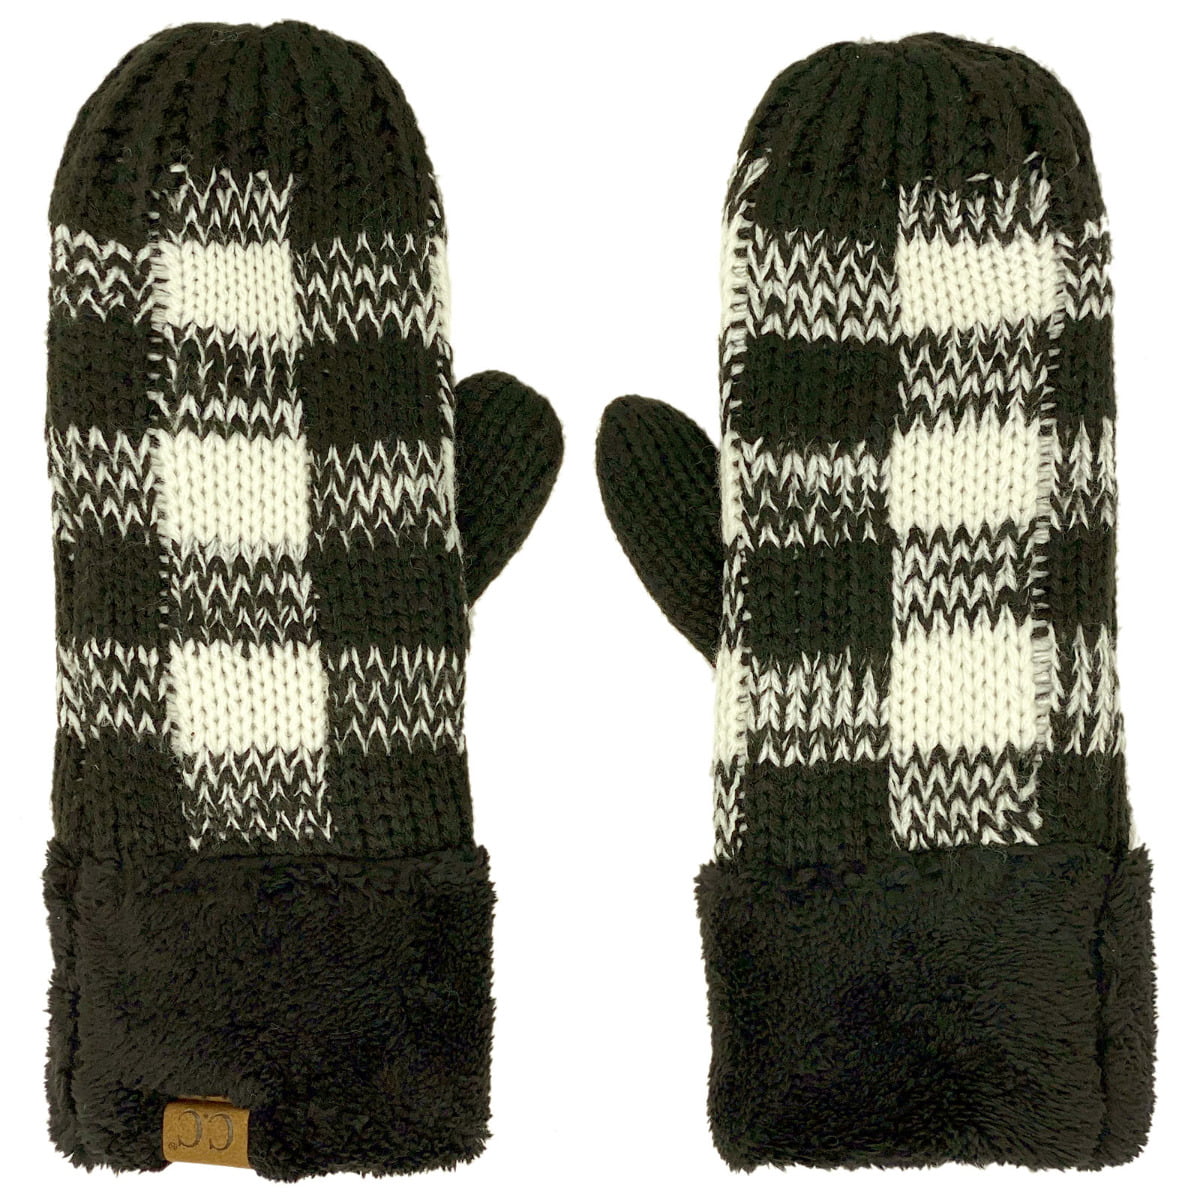 1/2 Pairs Womens Winter Knit Mittens Thick Warm Winter Gloves Mittens with Soft Plush Lining 